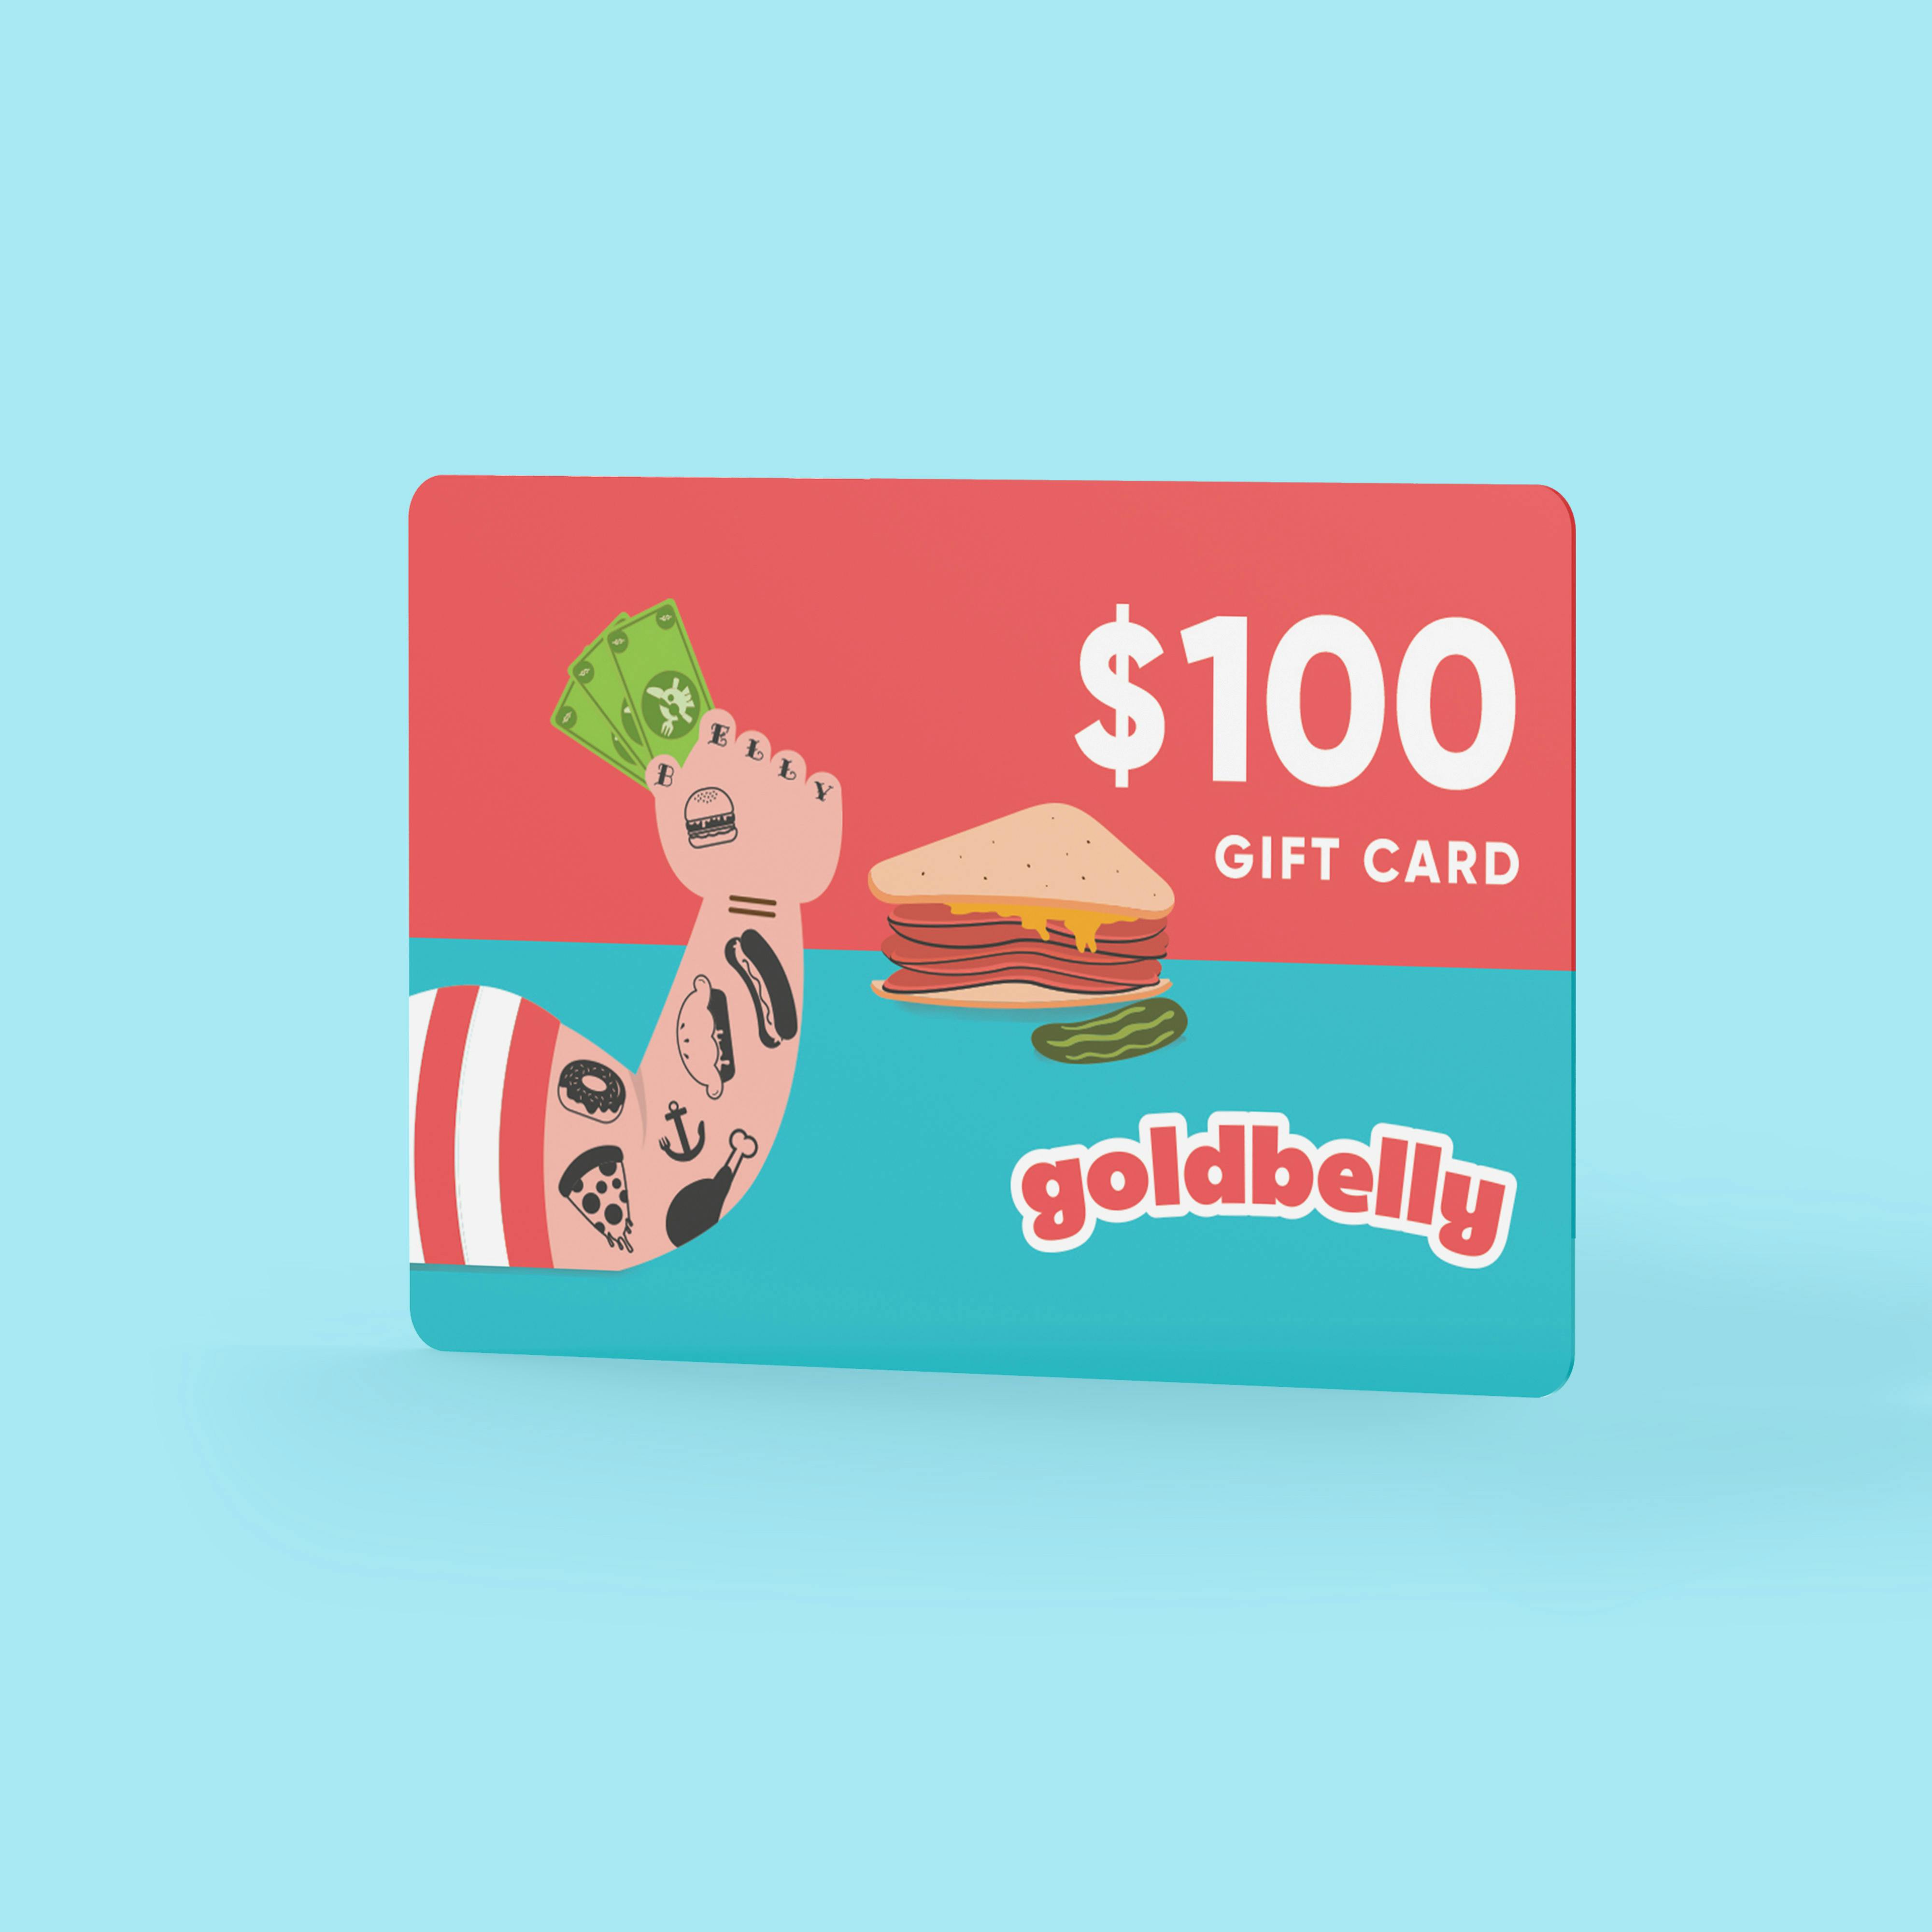 Giant Foods Gift Card Balance Can You Use Amazon Gift